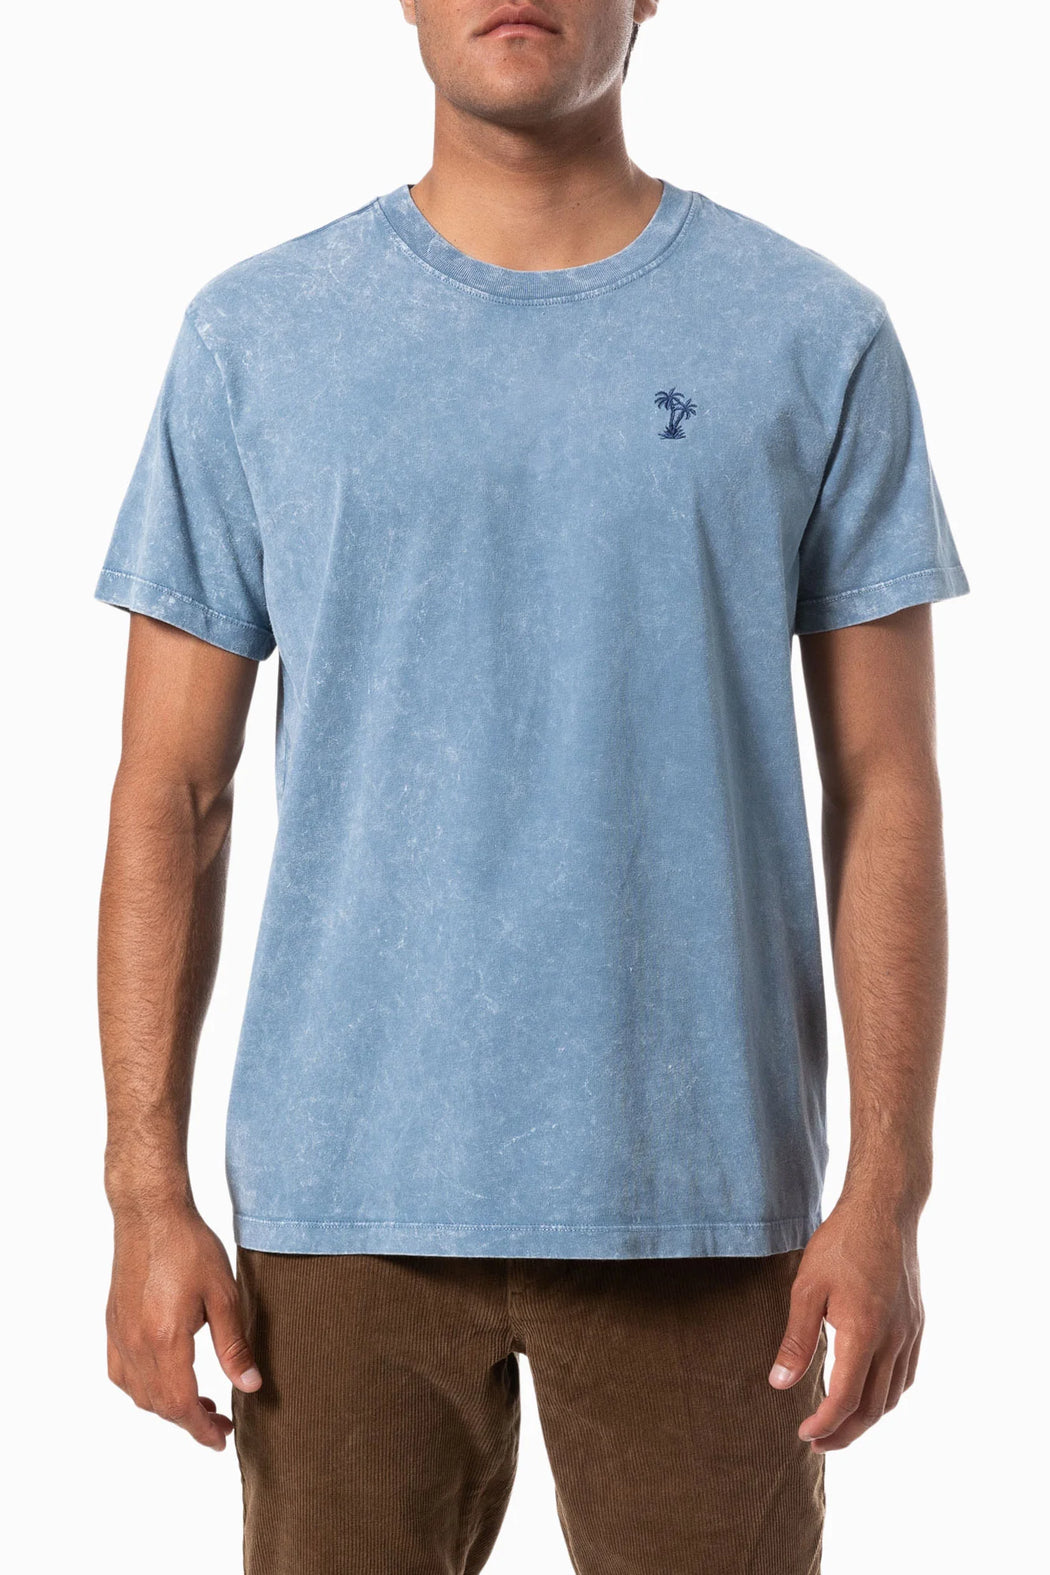 Retreat Embroidered Tee | Spring Blue Sand Wash